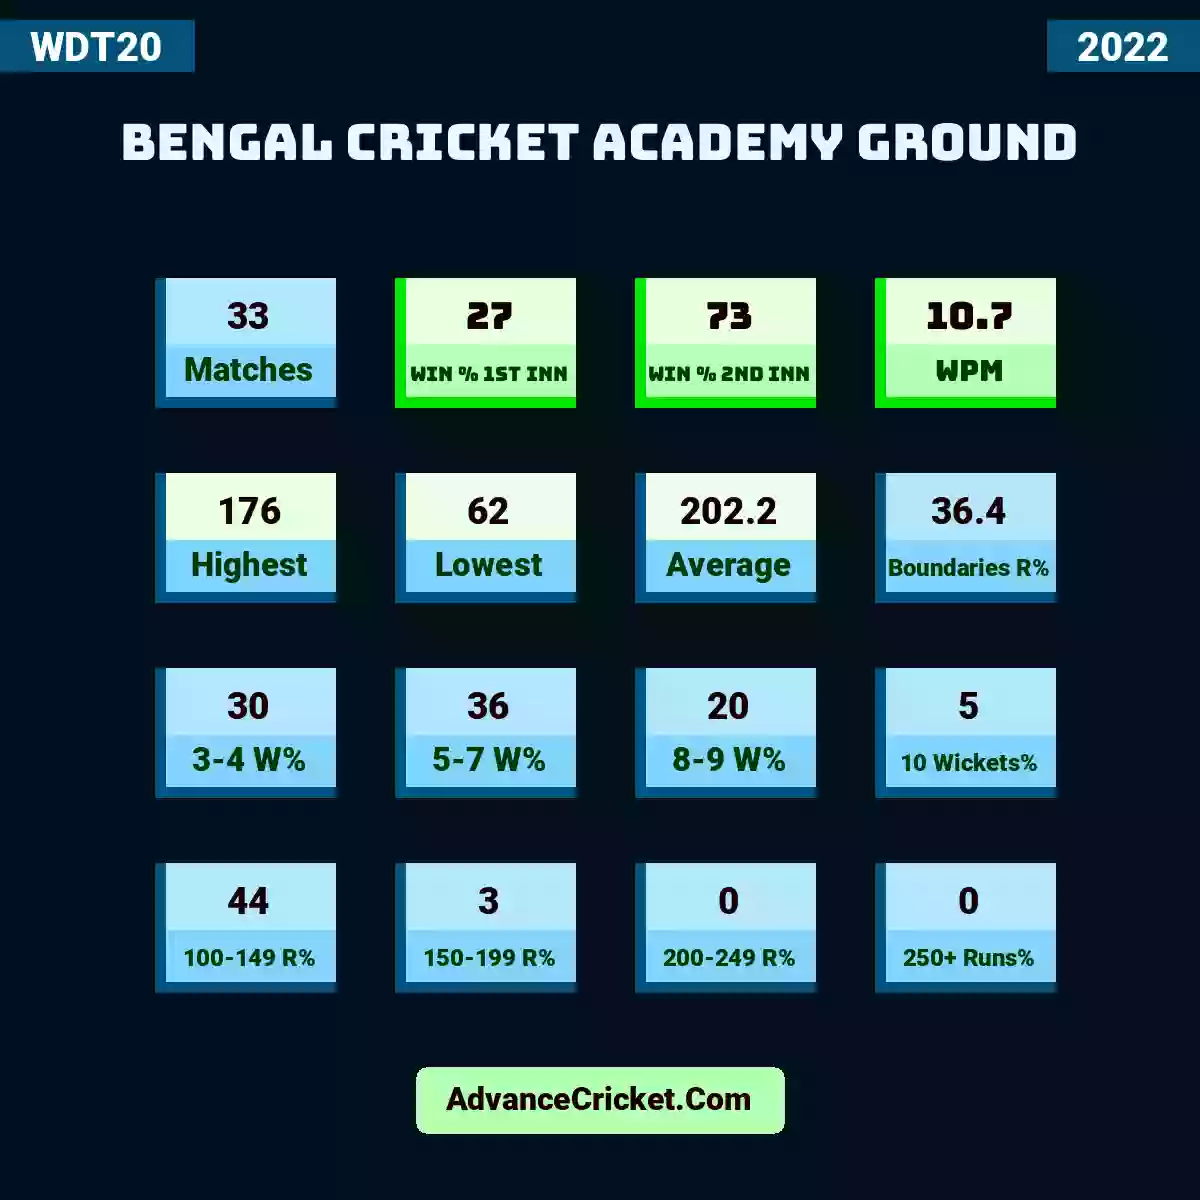 Image showing Bengal Cricket Academy Ground with Matches: 33, Win % 1st Inn: 27, Win % 2nd Inn: 73, WPM: 10.7, Highest: 176, Lowest: 62, Average: 202.2, Boundaries R%: 36.4, 3-4 W%: 30, 5-7 W%: 36, 8-9 W%: 20, 10 Wickets%: 5, 100-149 R%: 44, 150-199 R%: 3, 200-249 R%: 0, 250+ Runs%: 0.